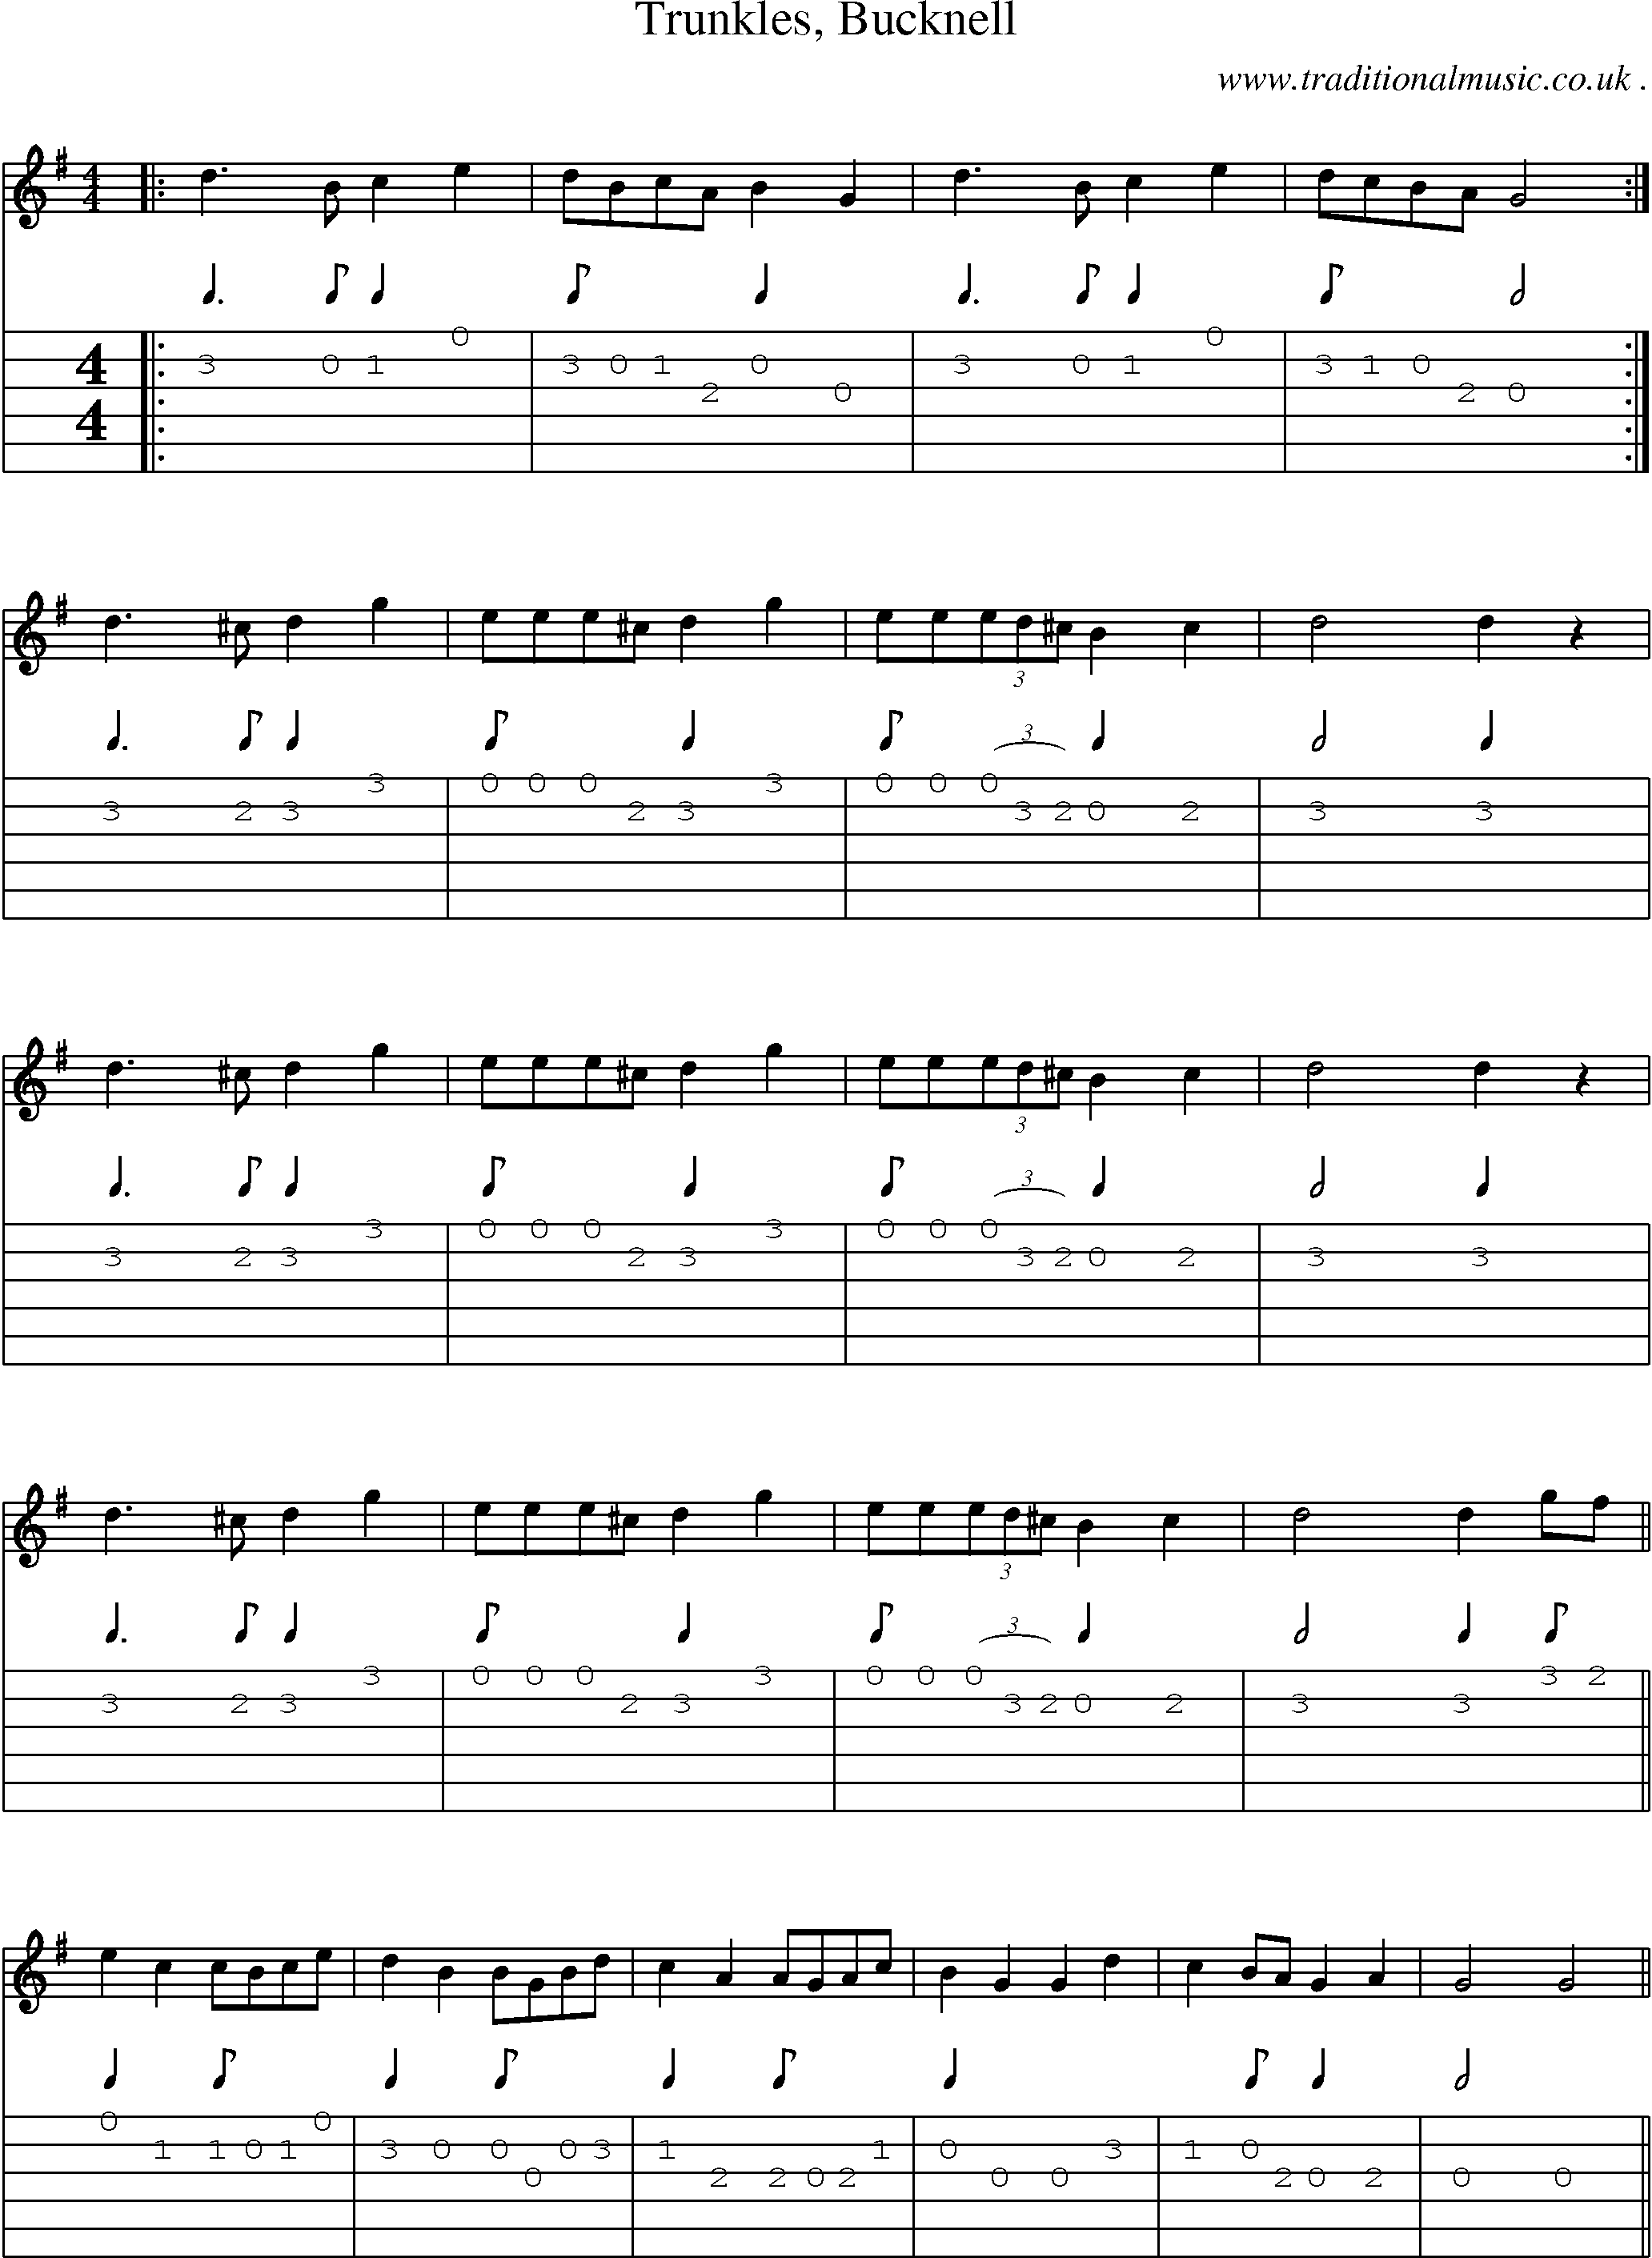 Sheet-Music and Guitar Tabs for Trunkles Bucknell